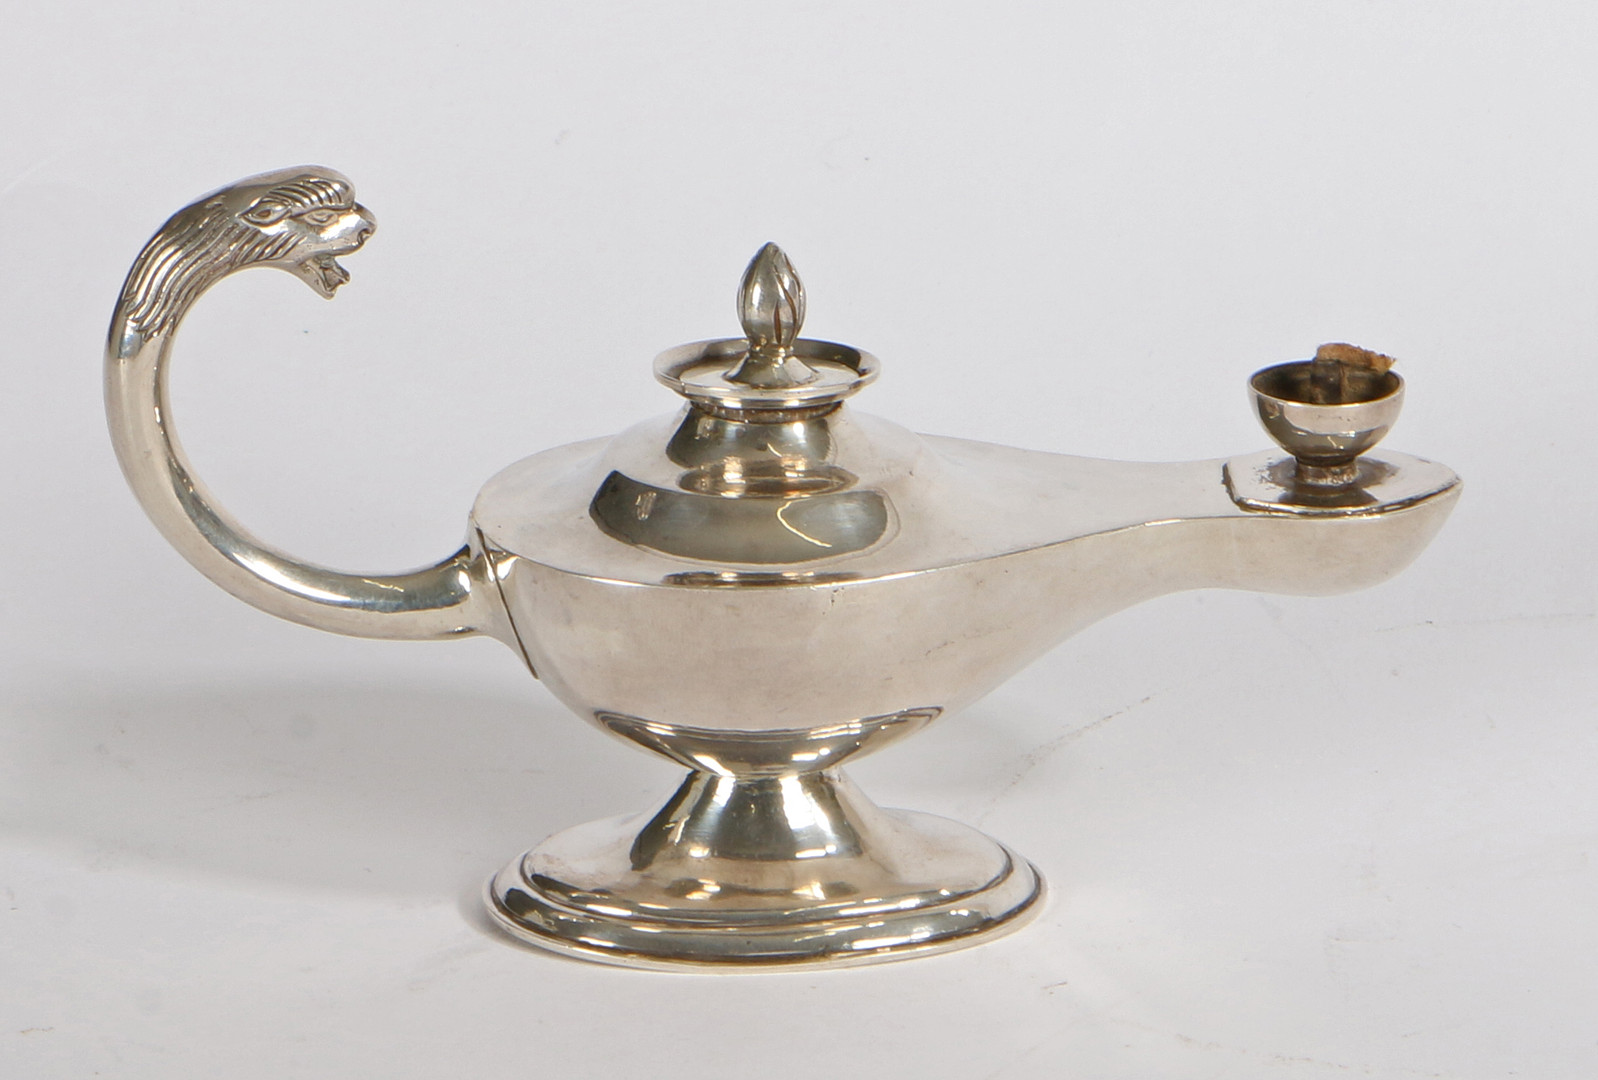 AN EARLY 20TH CENTURY AMERICAN HANDMADE SILVER ALADDIN'S LAMP TABLE LIGHTER C.1920. - Image 2 of 3